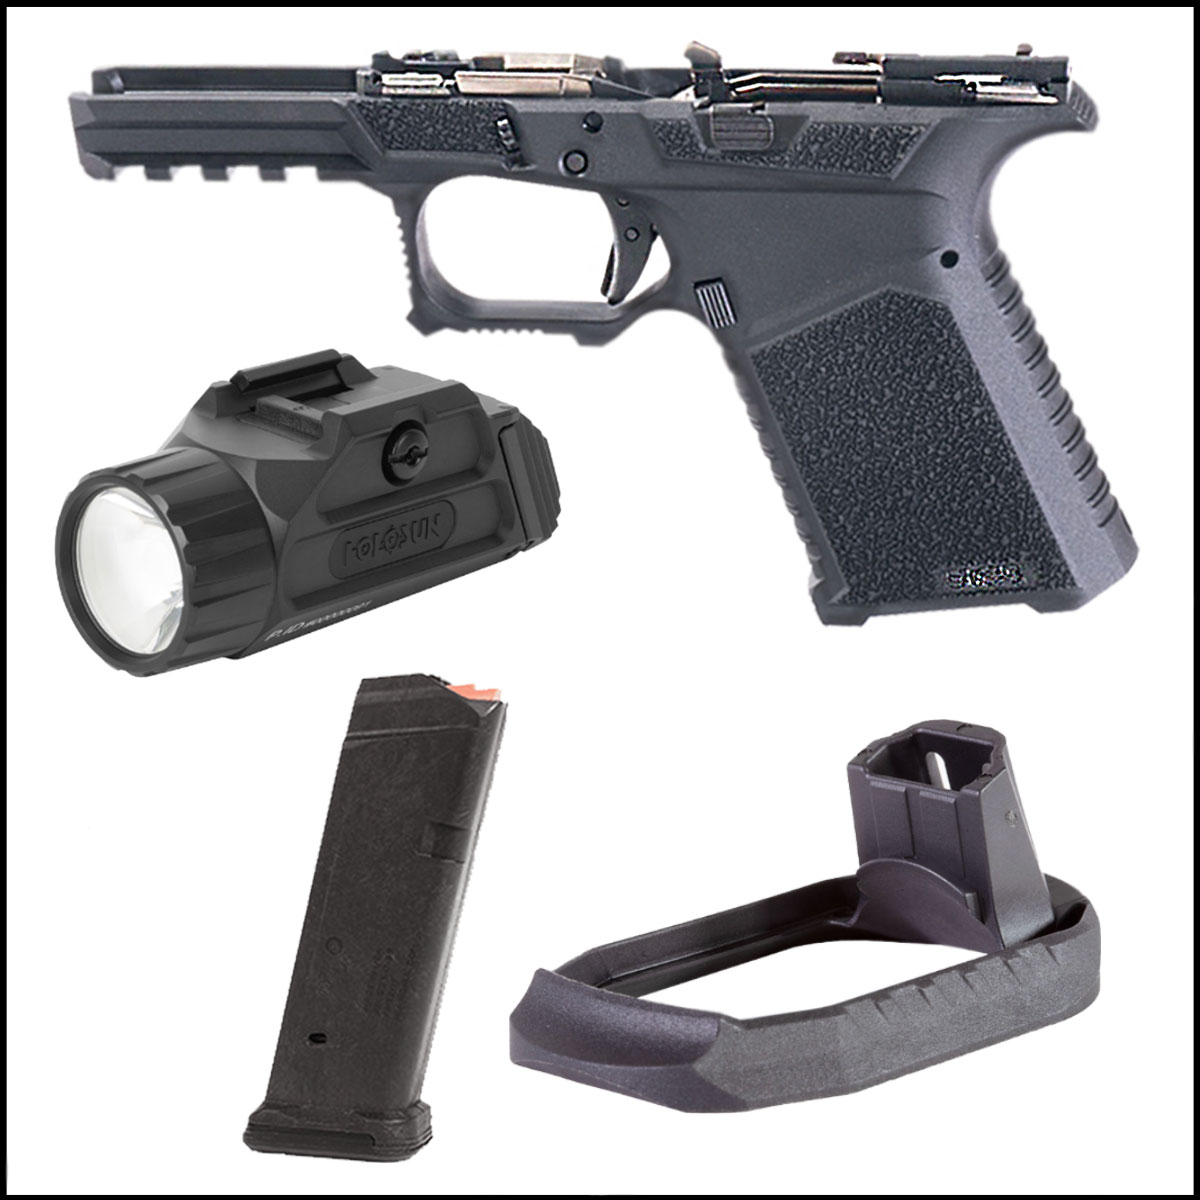 Light The Way Combo: SCT Manufacturing Full Frame Assembly - Black  + SCT Manufacturing Magwell for SCT19 Frame + Magpul PMAG 15 GL9,  G19 Compatible 15 Round Capacity, Black  + Holosun H-SUN P.ID Light 1000 Lumens,